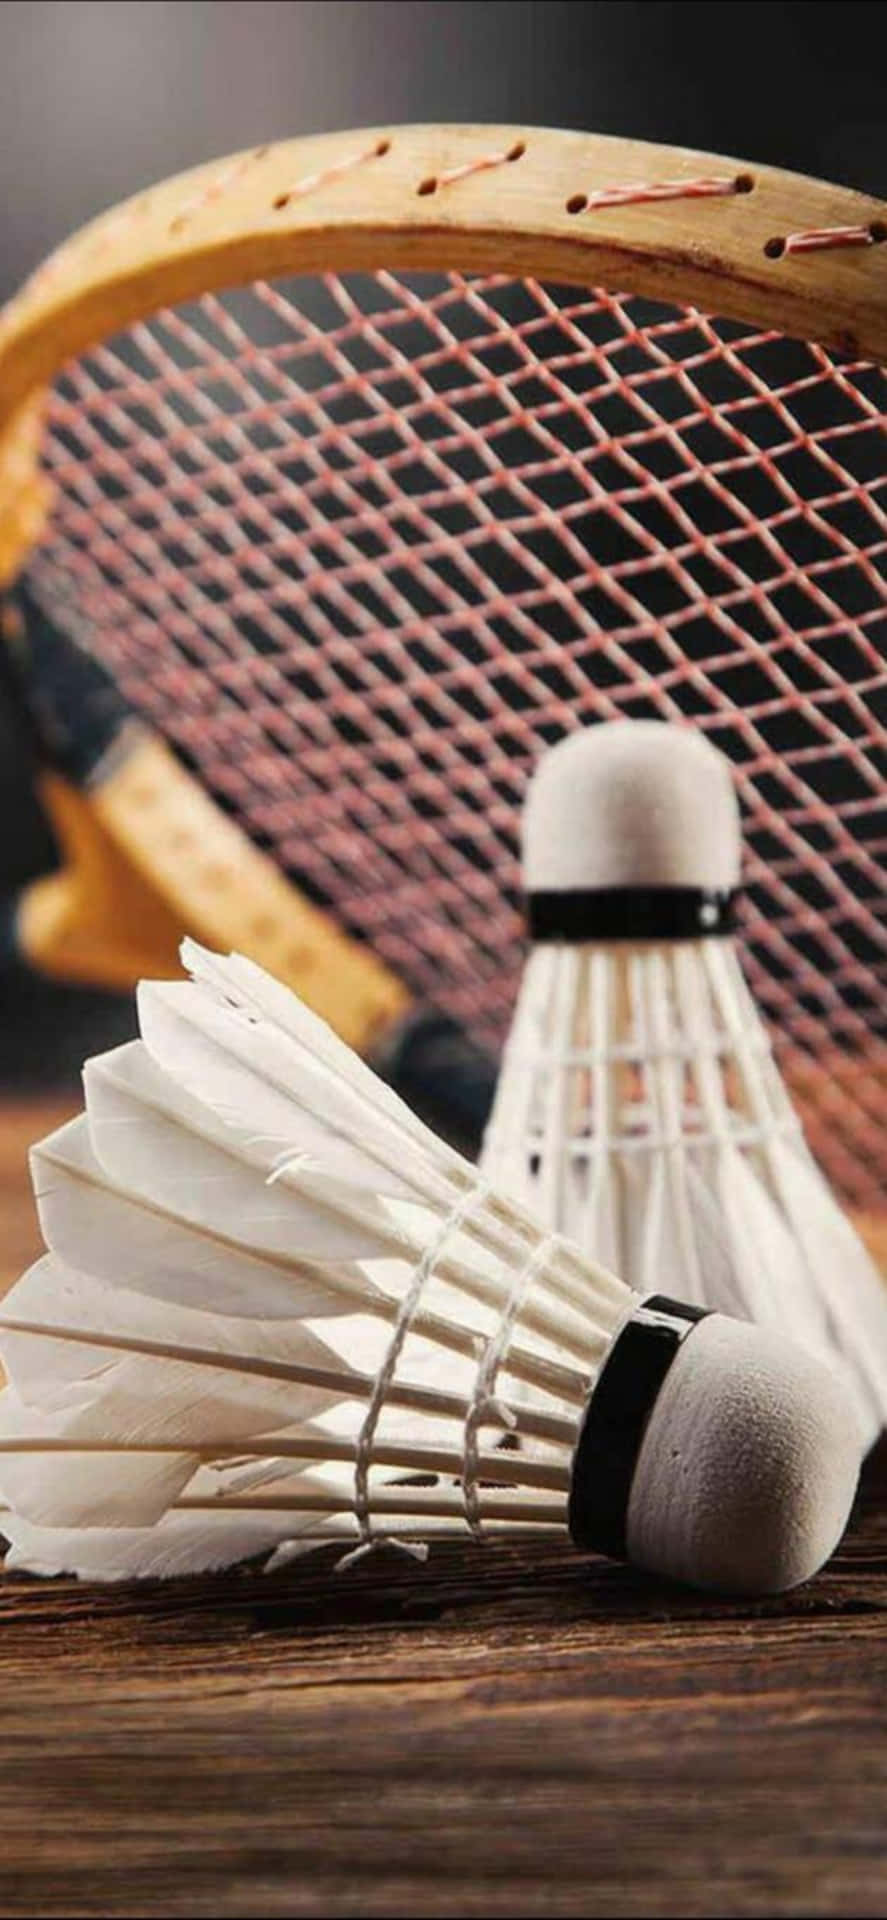 A Focus on Excellence: iPhone Xs Max and Badminton